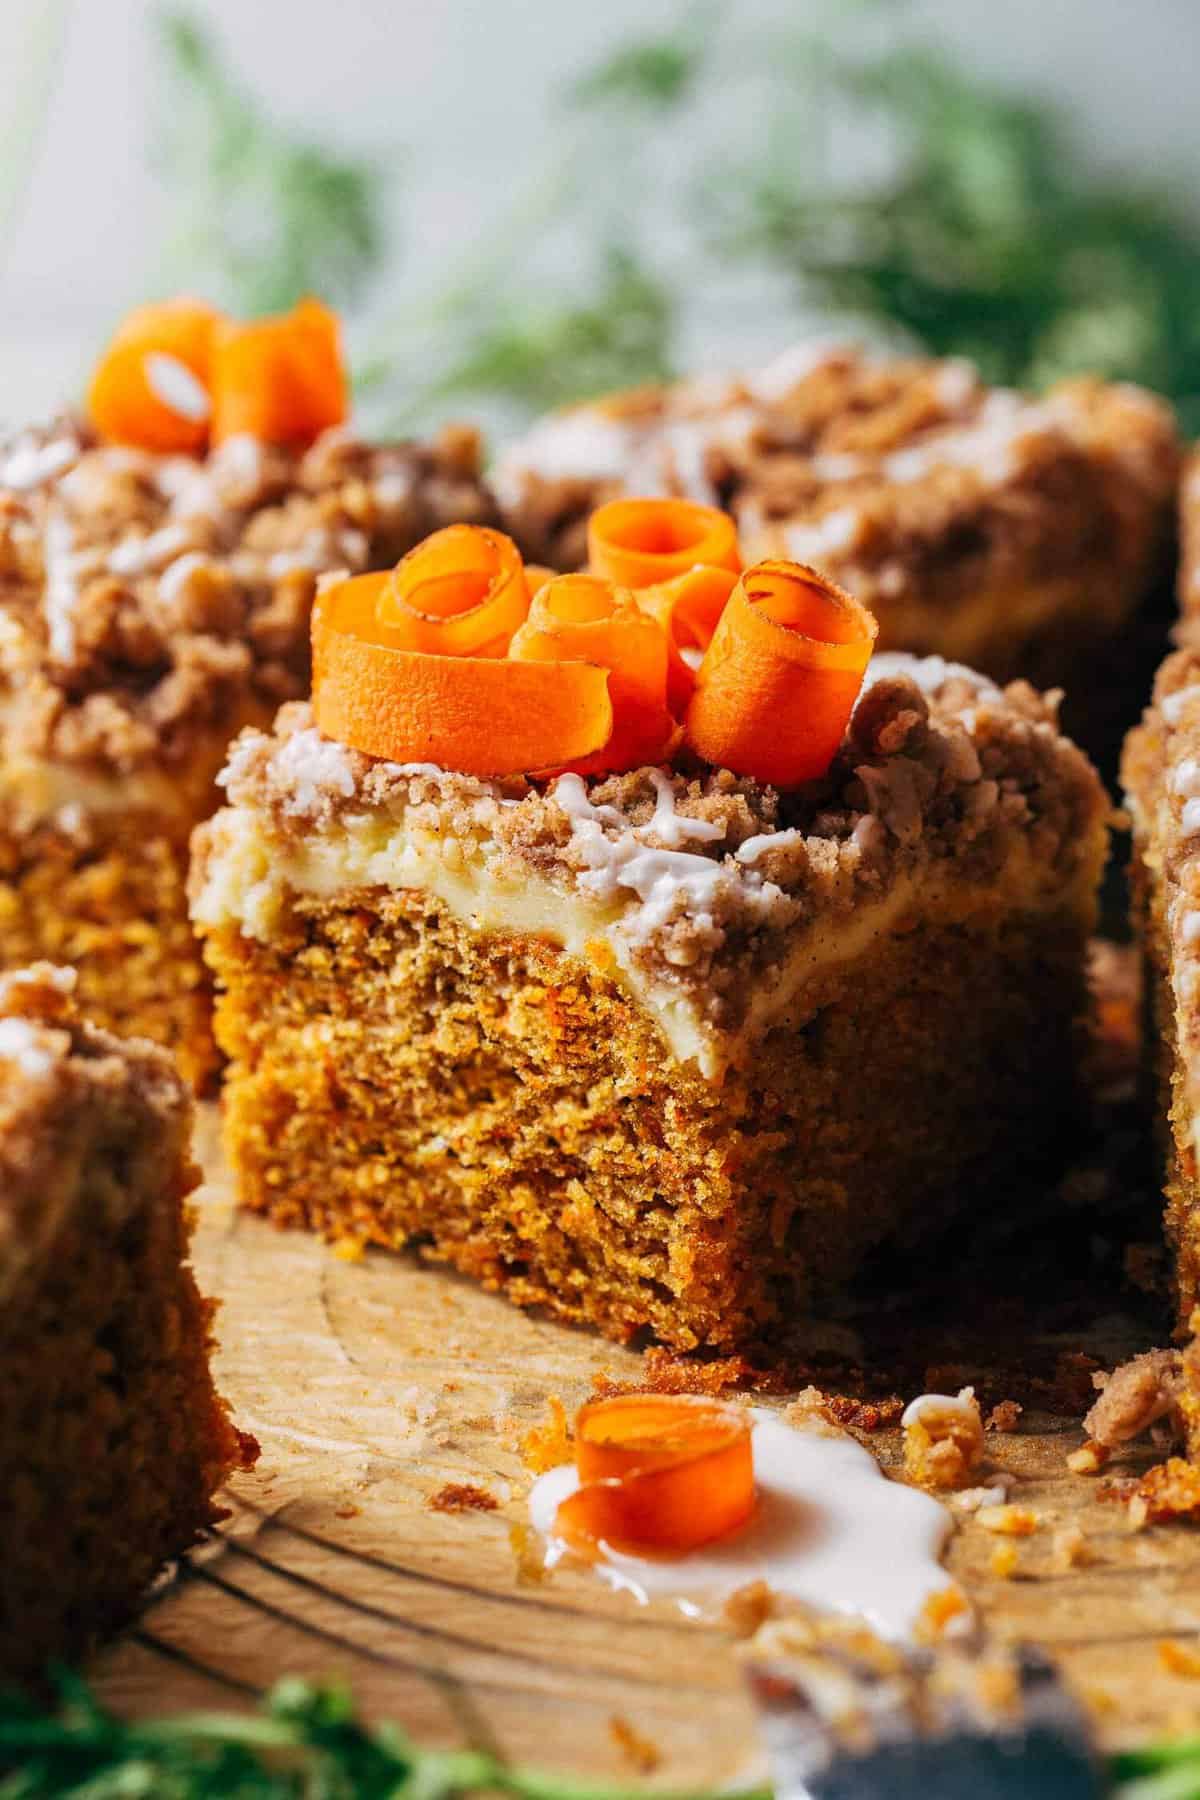 The Best Incredibly Moist Carrot Cake – Takes Two Eggs